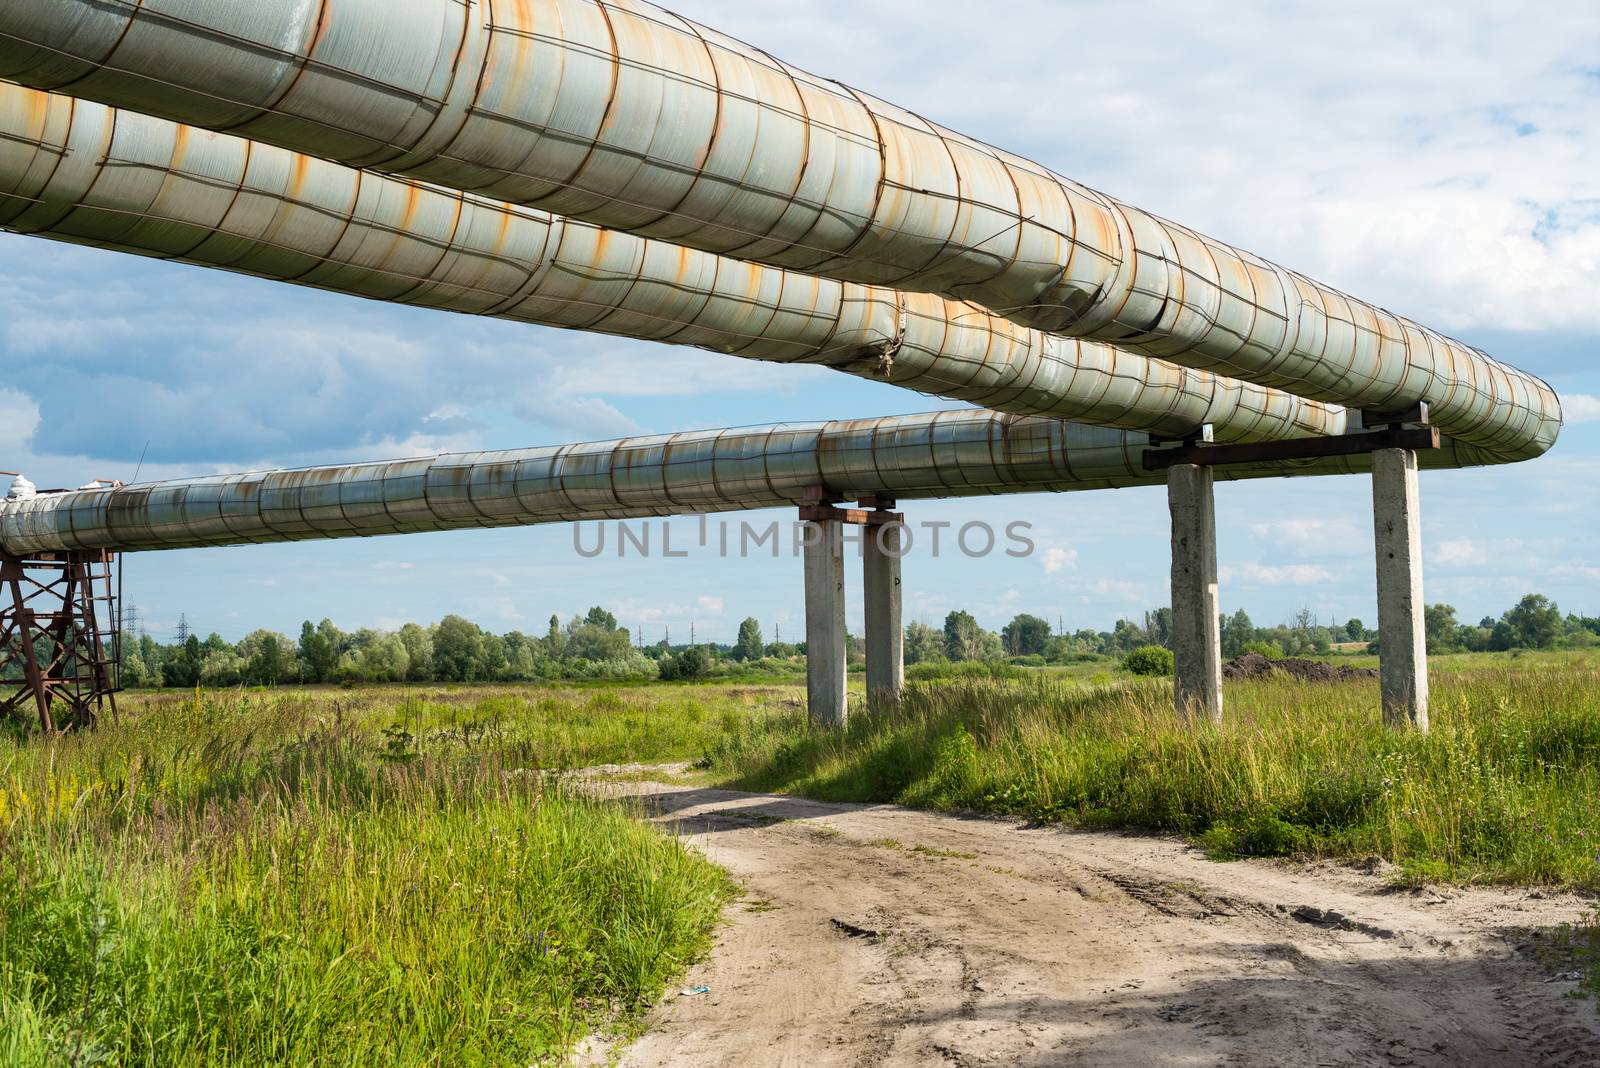 Elevated section of the pipelines above the dirt road by rootstocks